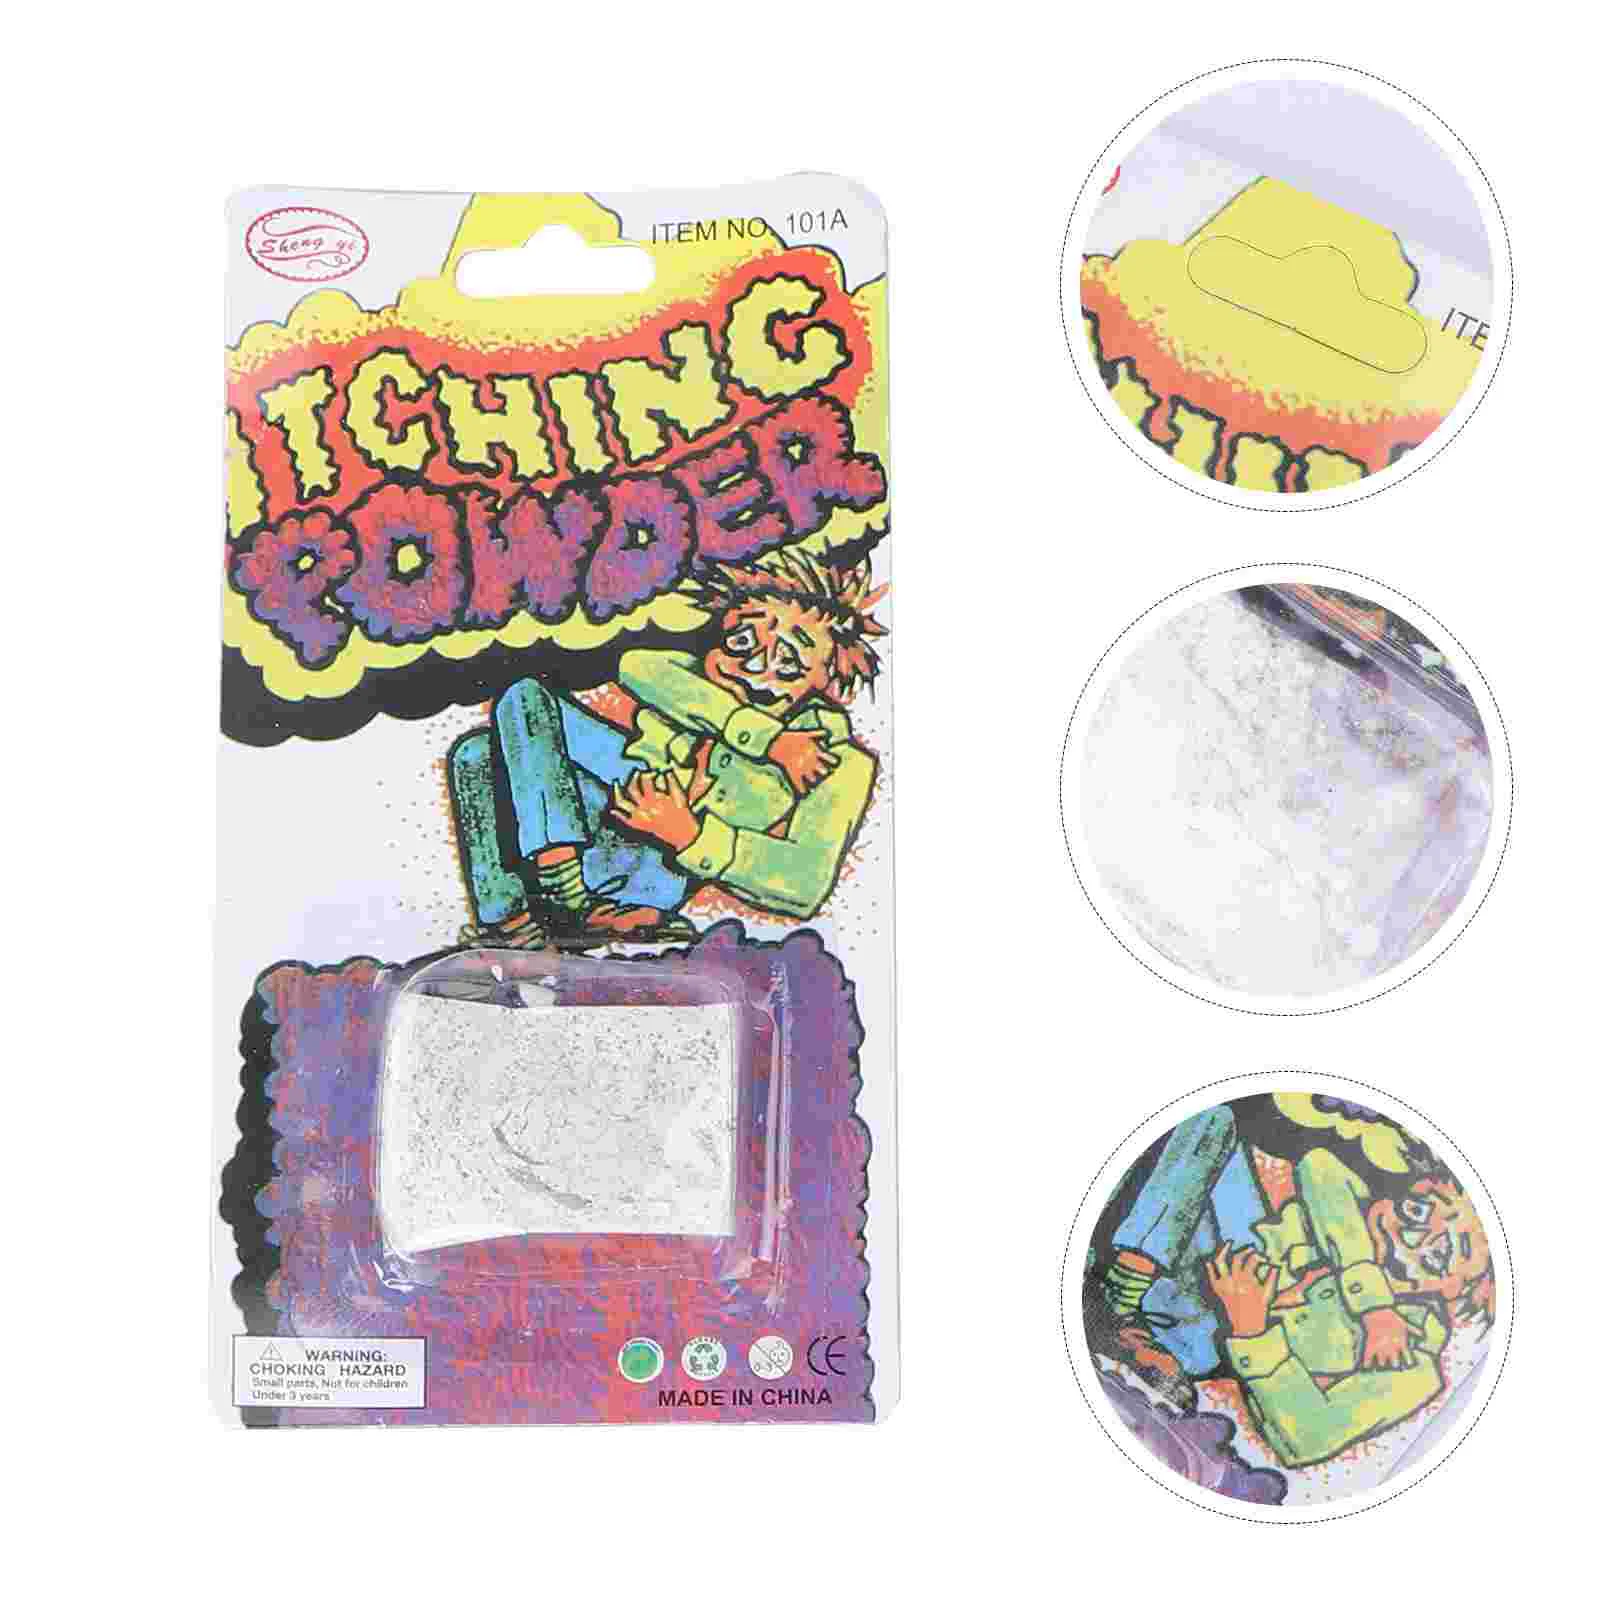 

10PCS Halloween Trick Prop Itching Powder Prank Party Supplies Perfect for Joke Surprise April Fools' Day